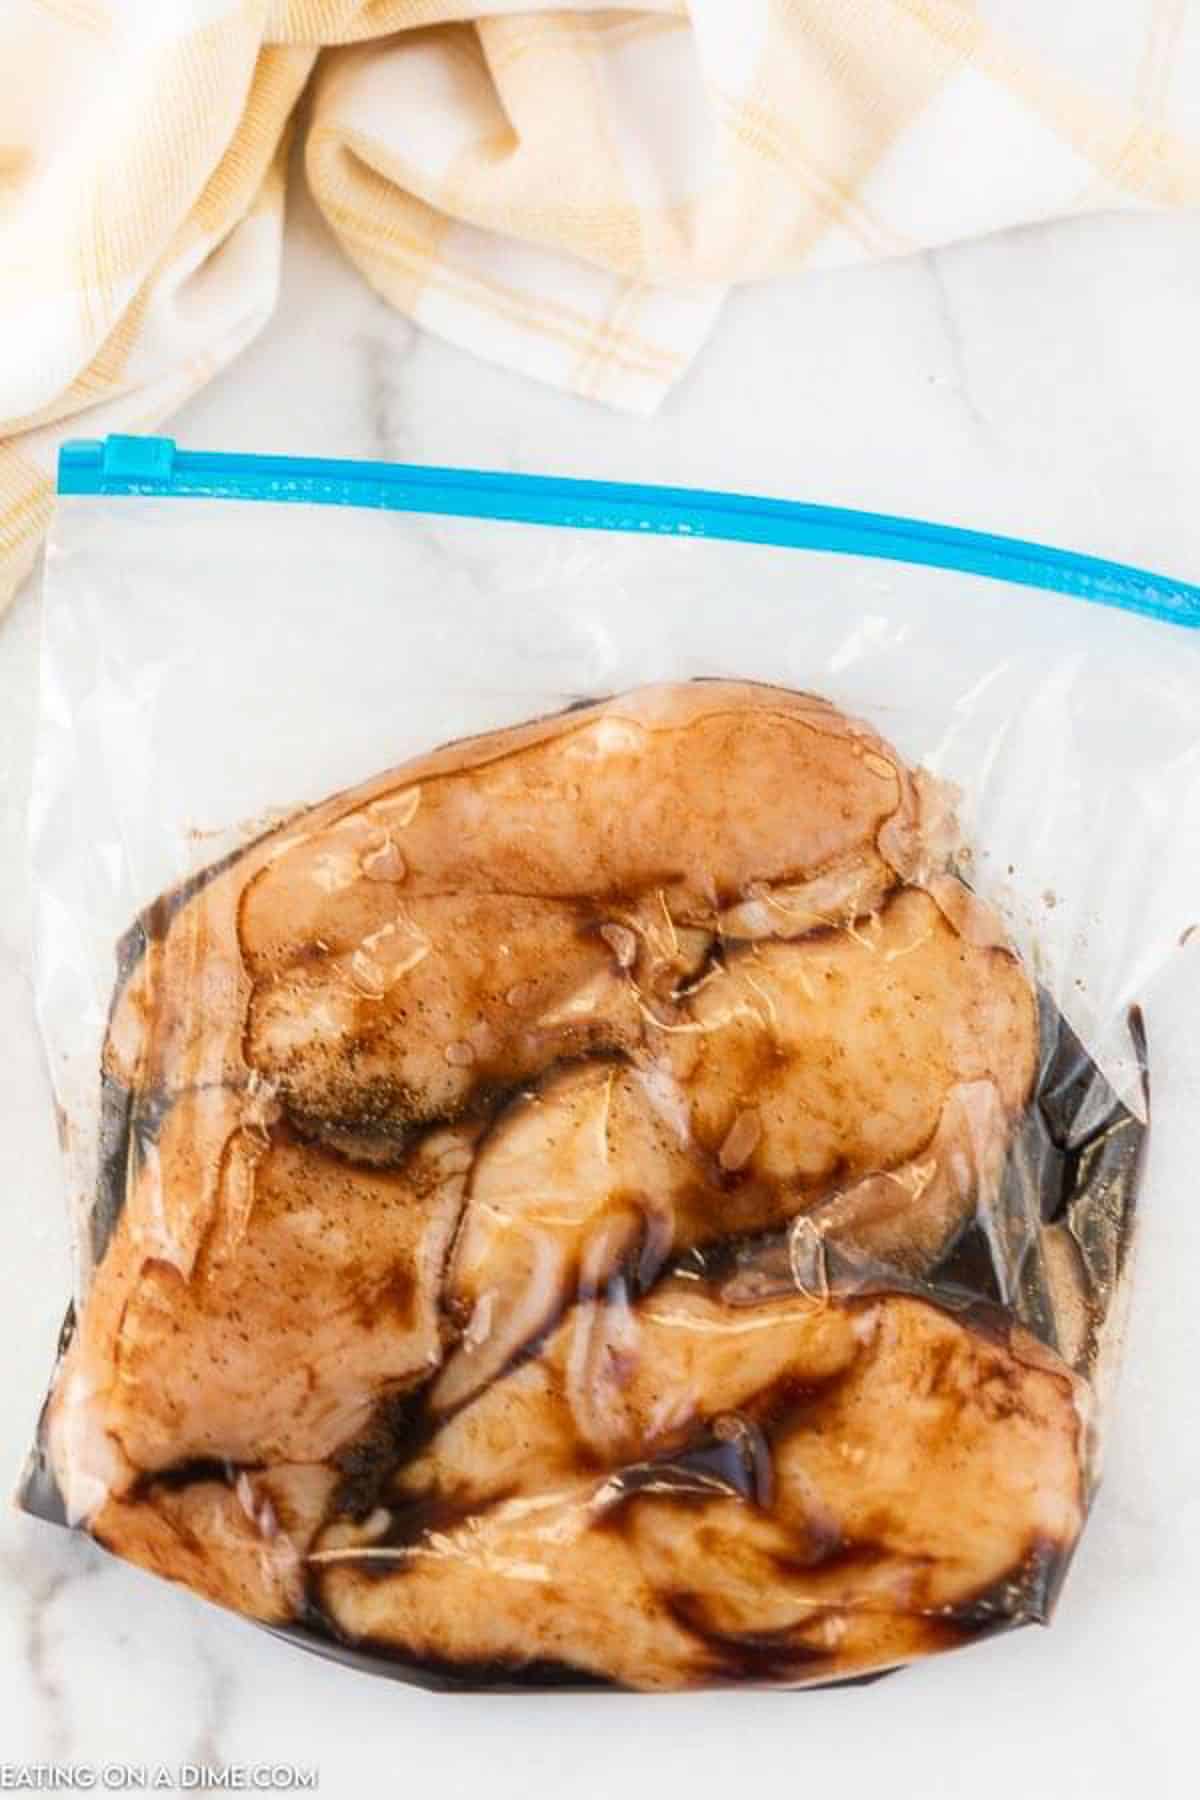 The chicken breasts marinading in a freezer bag with the marinade ingredients.  